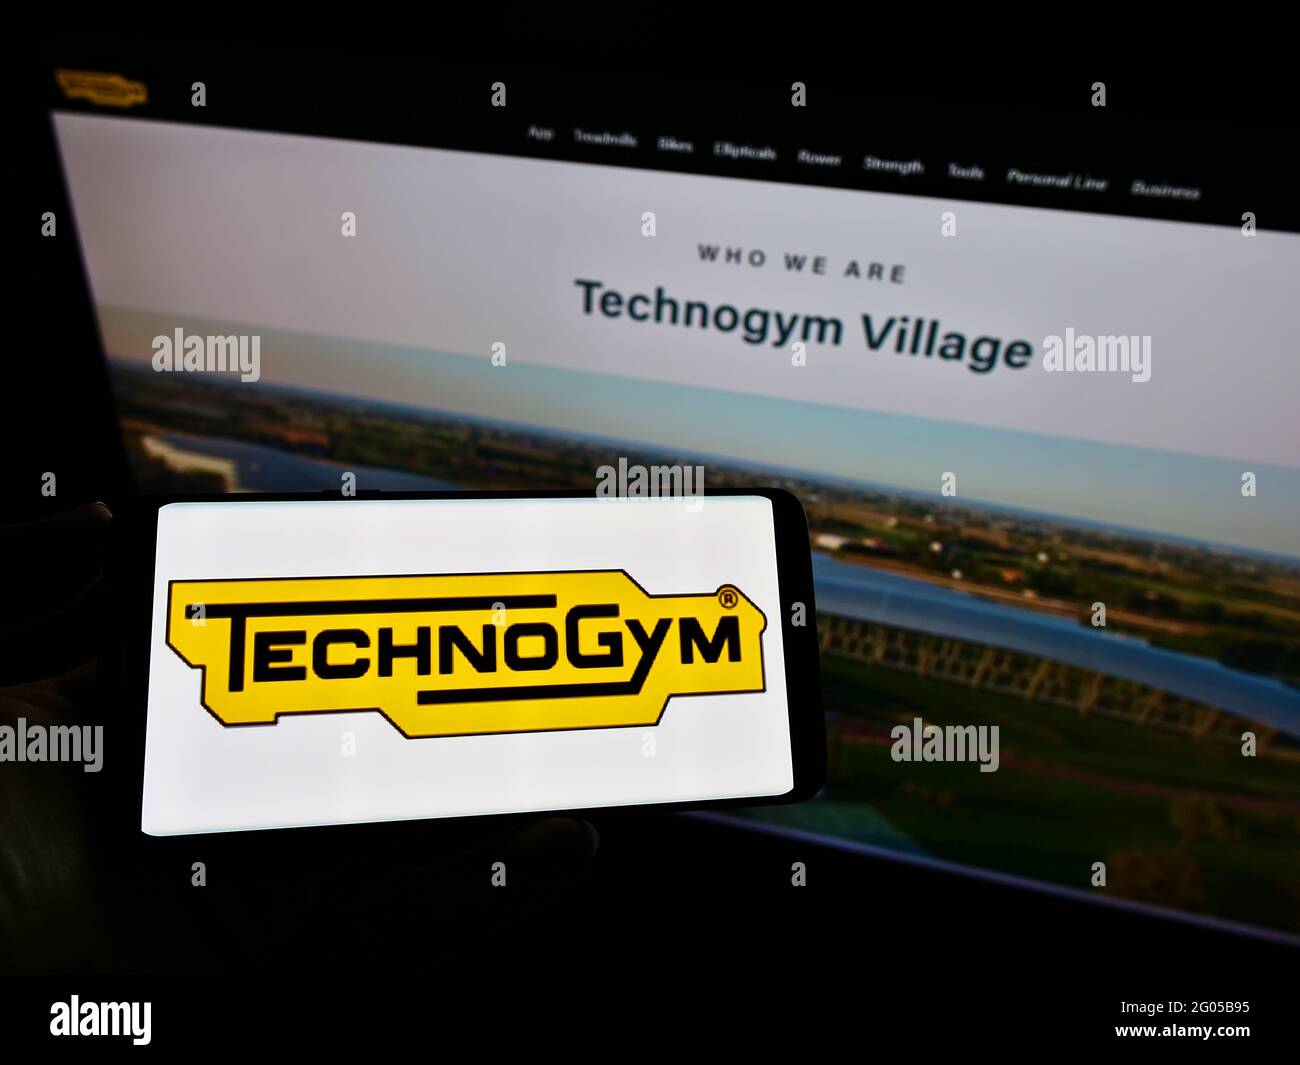 Person holding mobile phone with logo of Italian fitness equipment company Technogym S.p.A. on screen in front of web page. Focus on phone display. Stock Photo